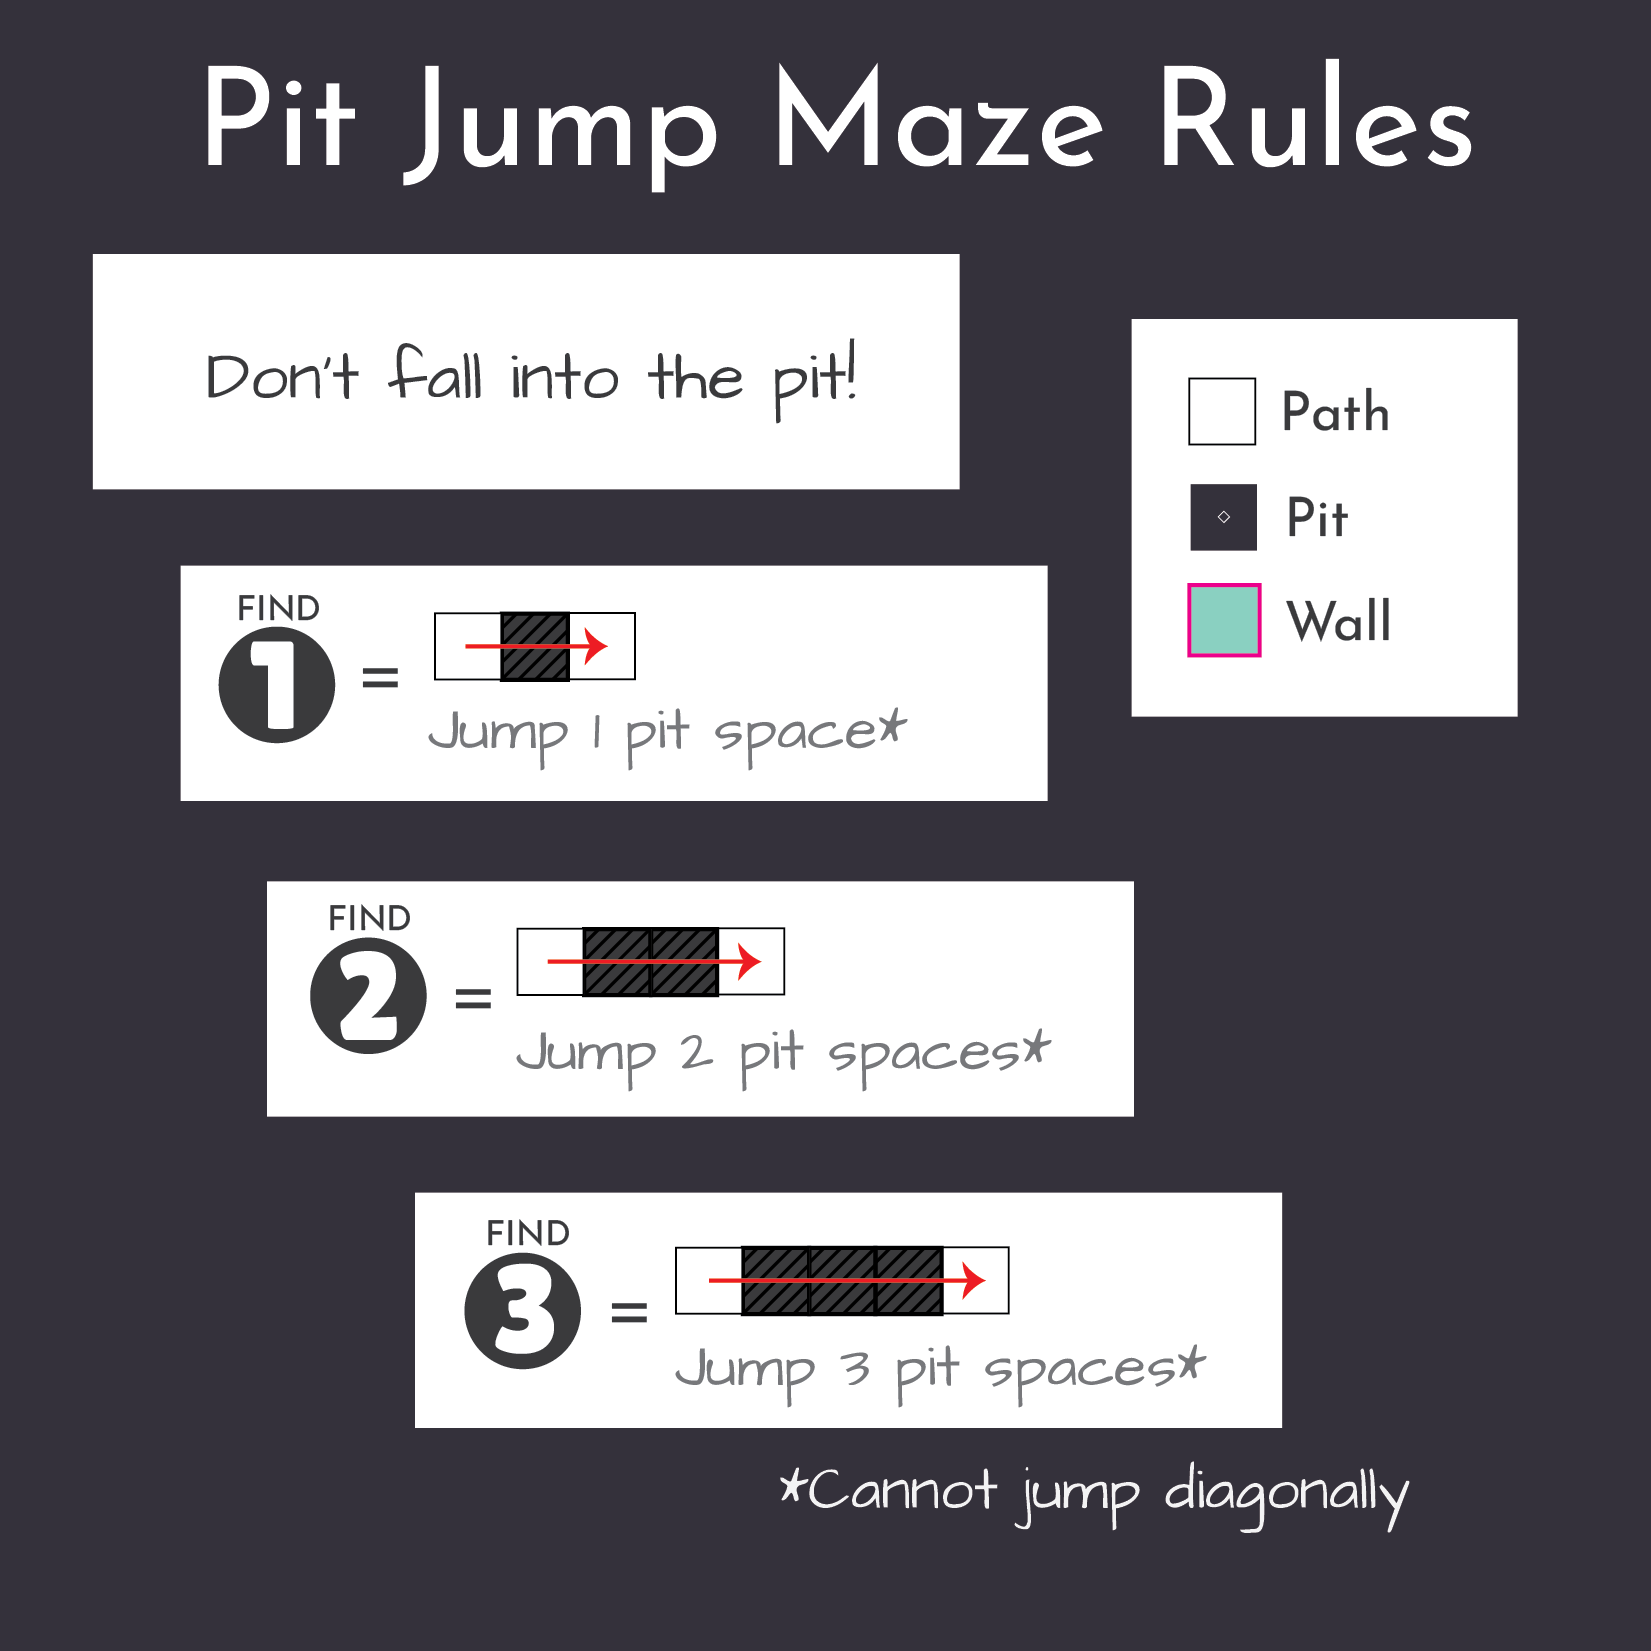 Find 1) Jump 1 pit space. Find 2) Jump 2 pit spaces. Find 3) Jump 3 pit spaces. Cannot jump diagonally